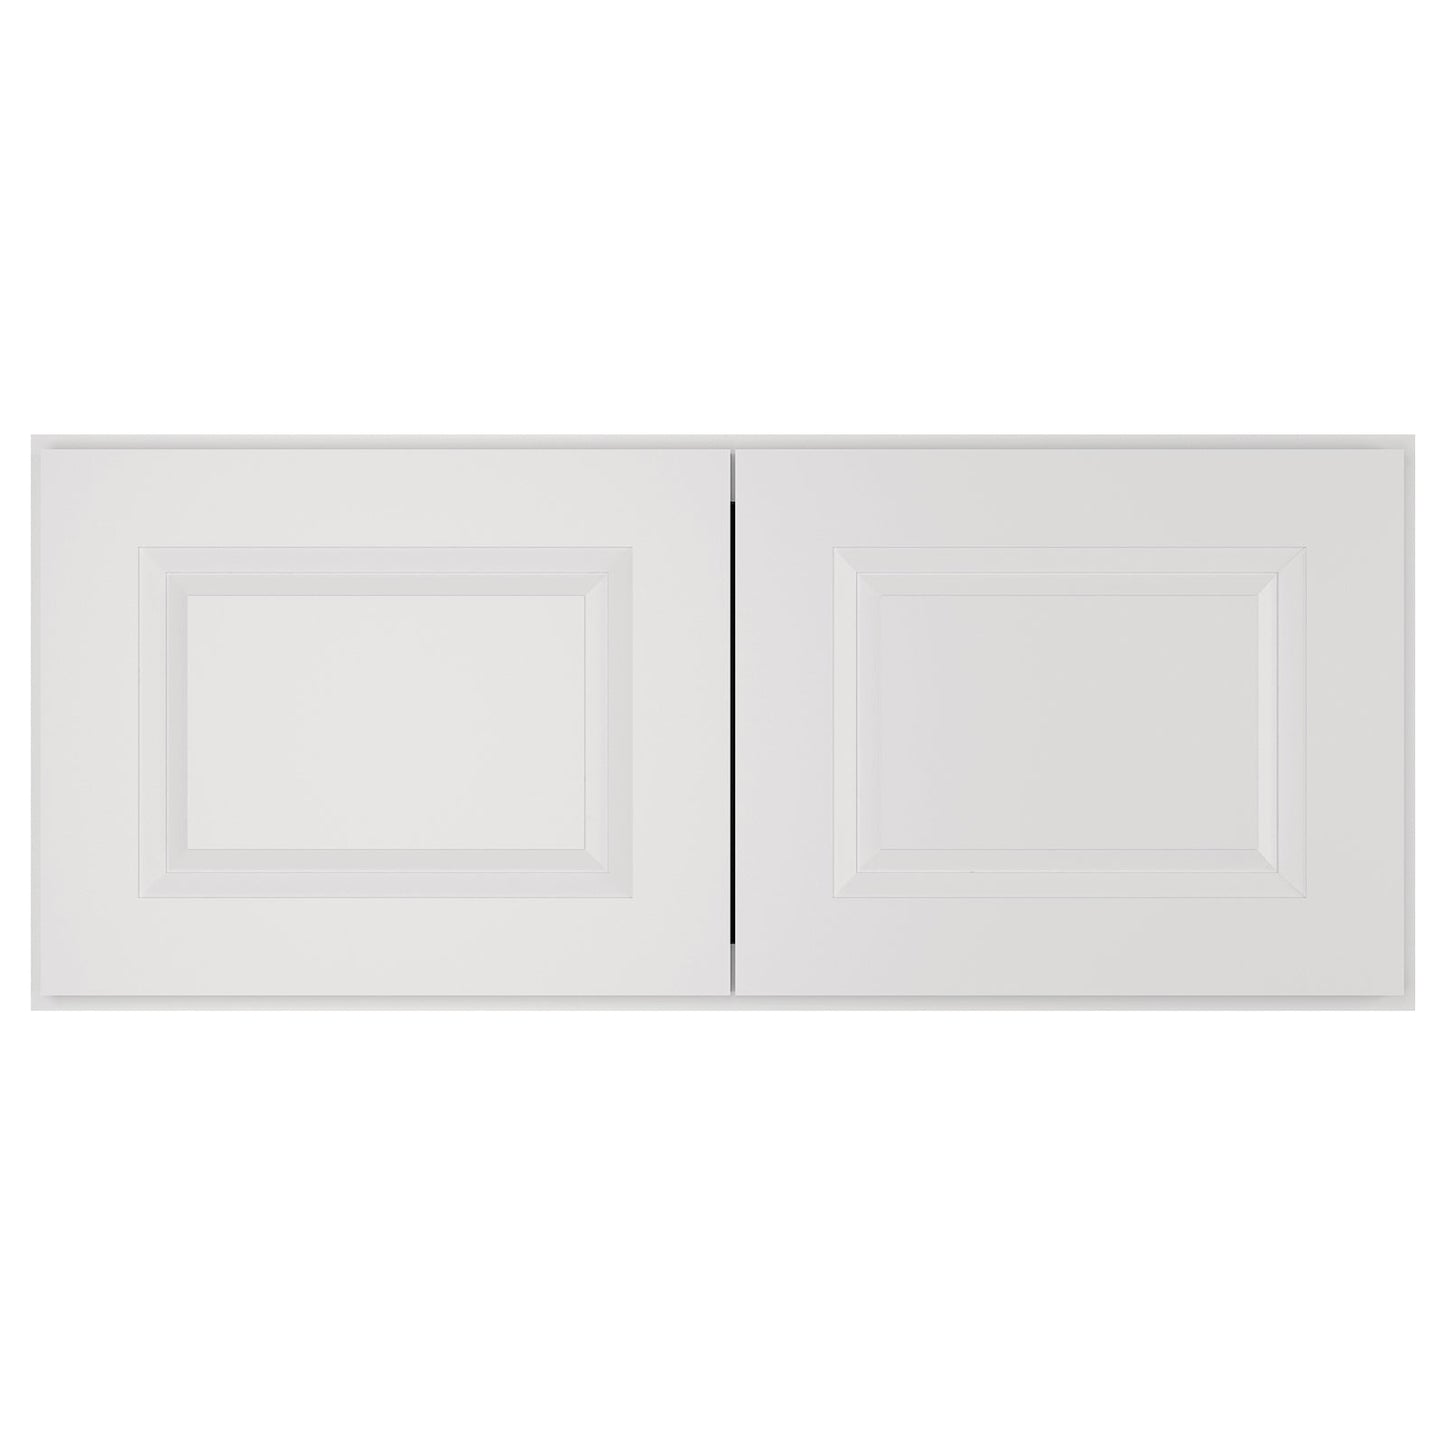 Medicine Cabinet Wall Mounted W3615